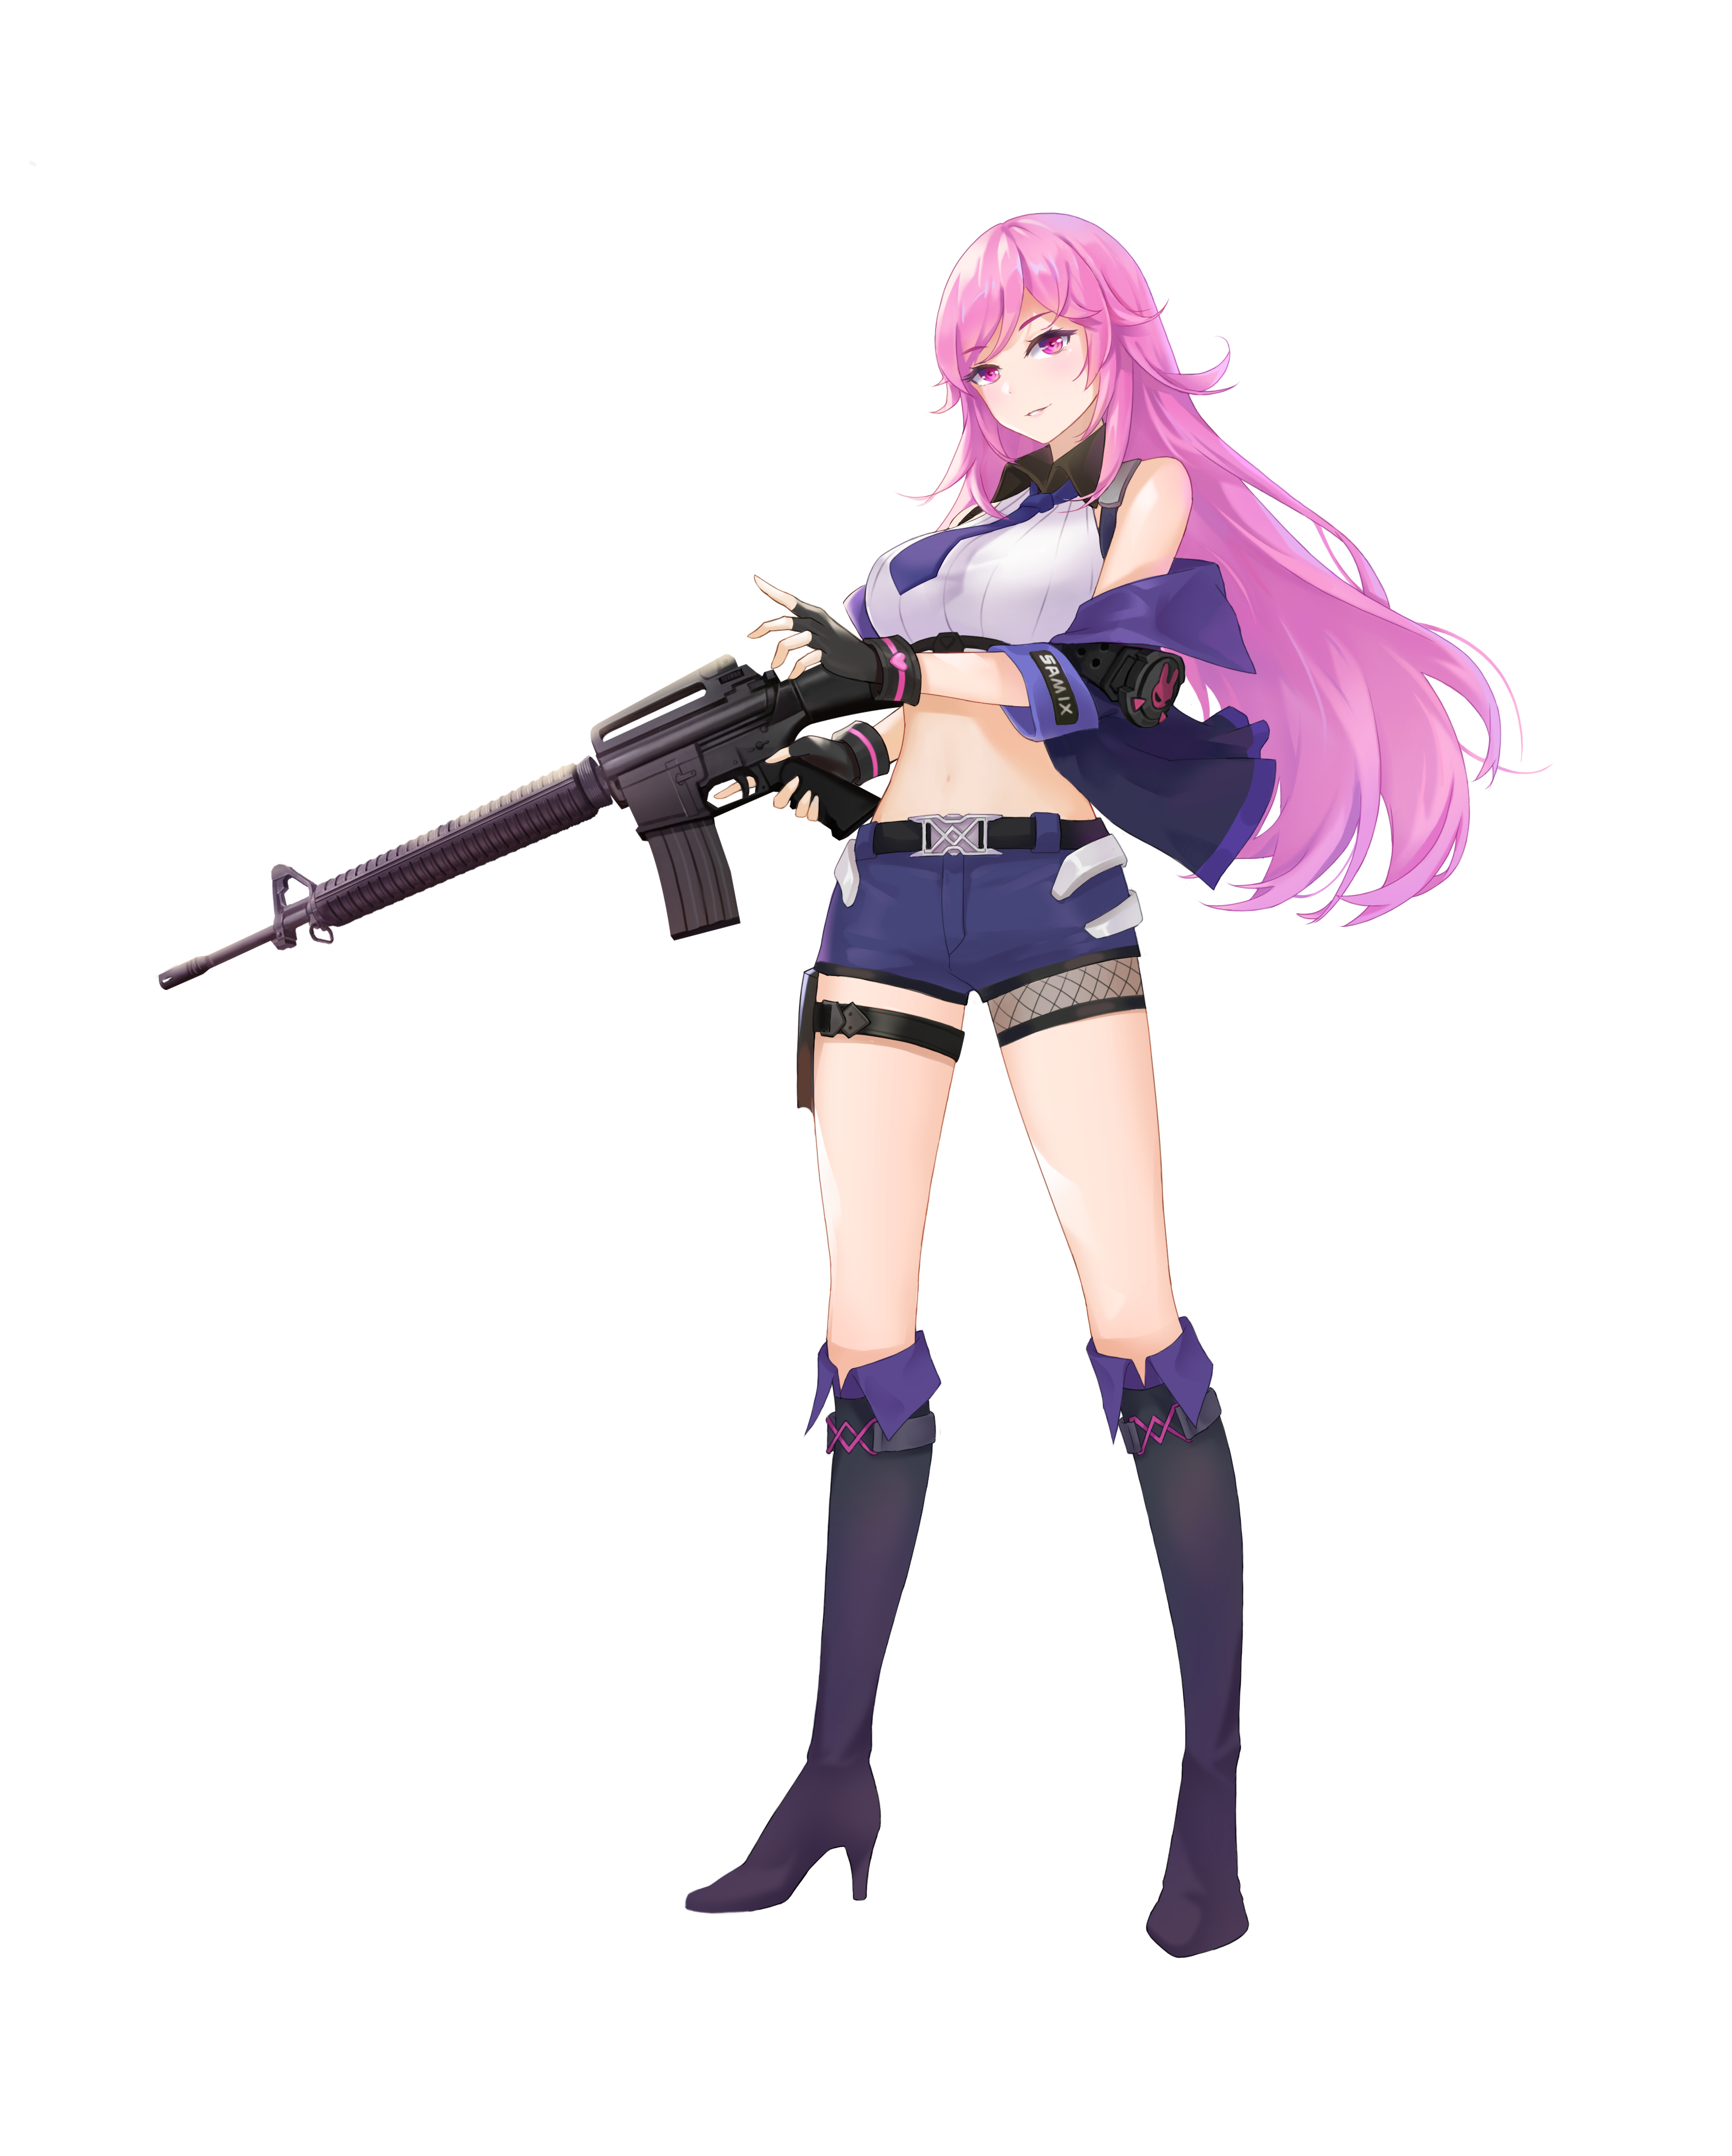 M16A4.png